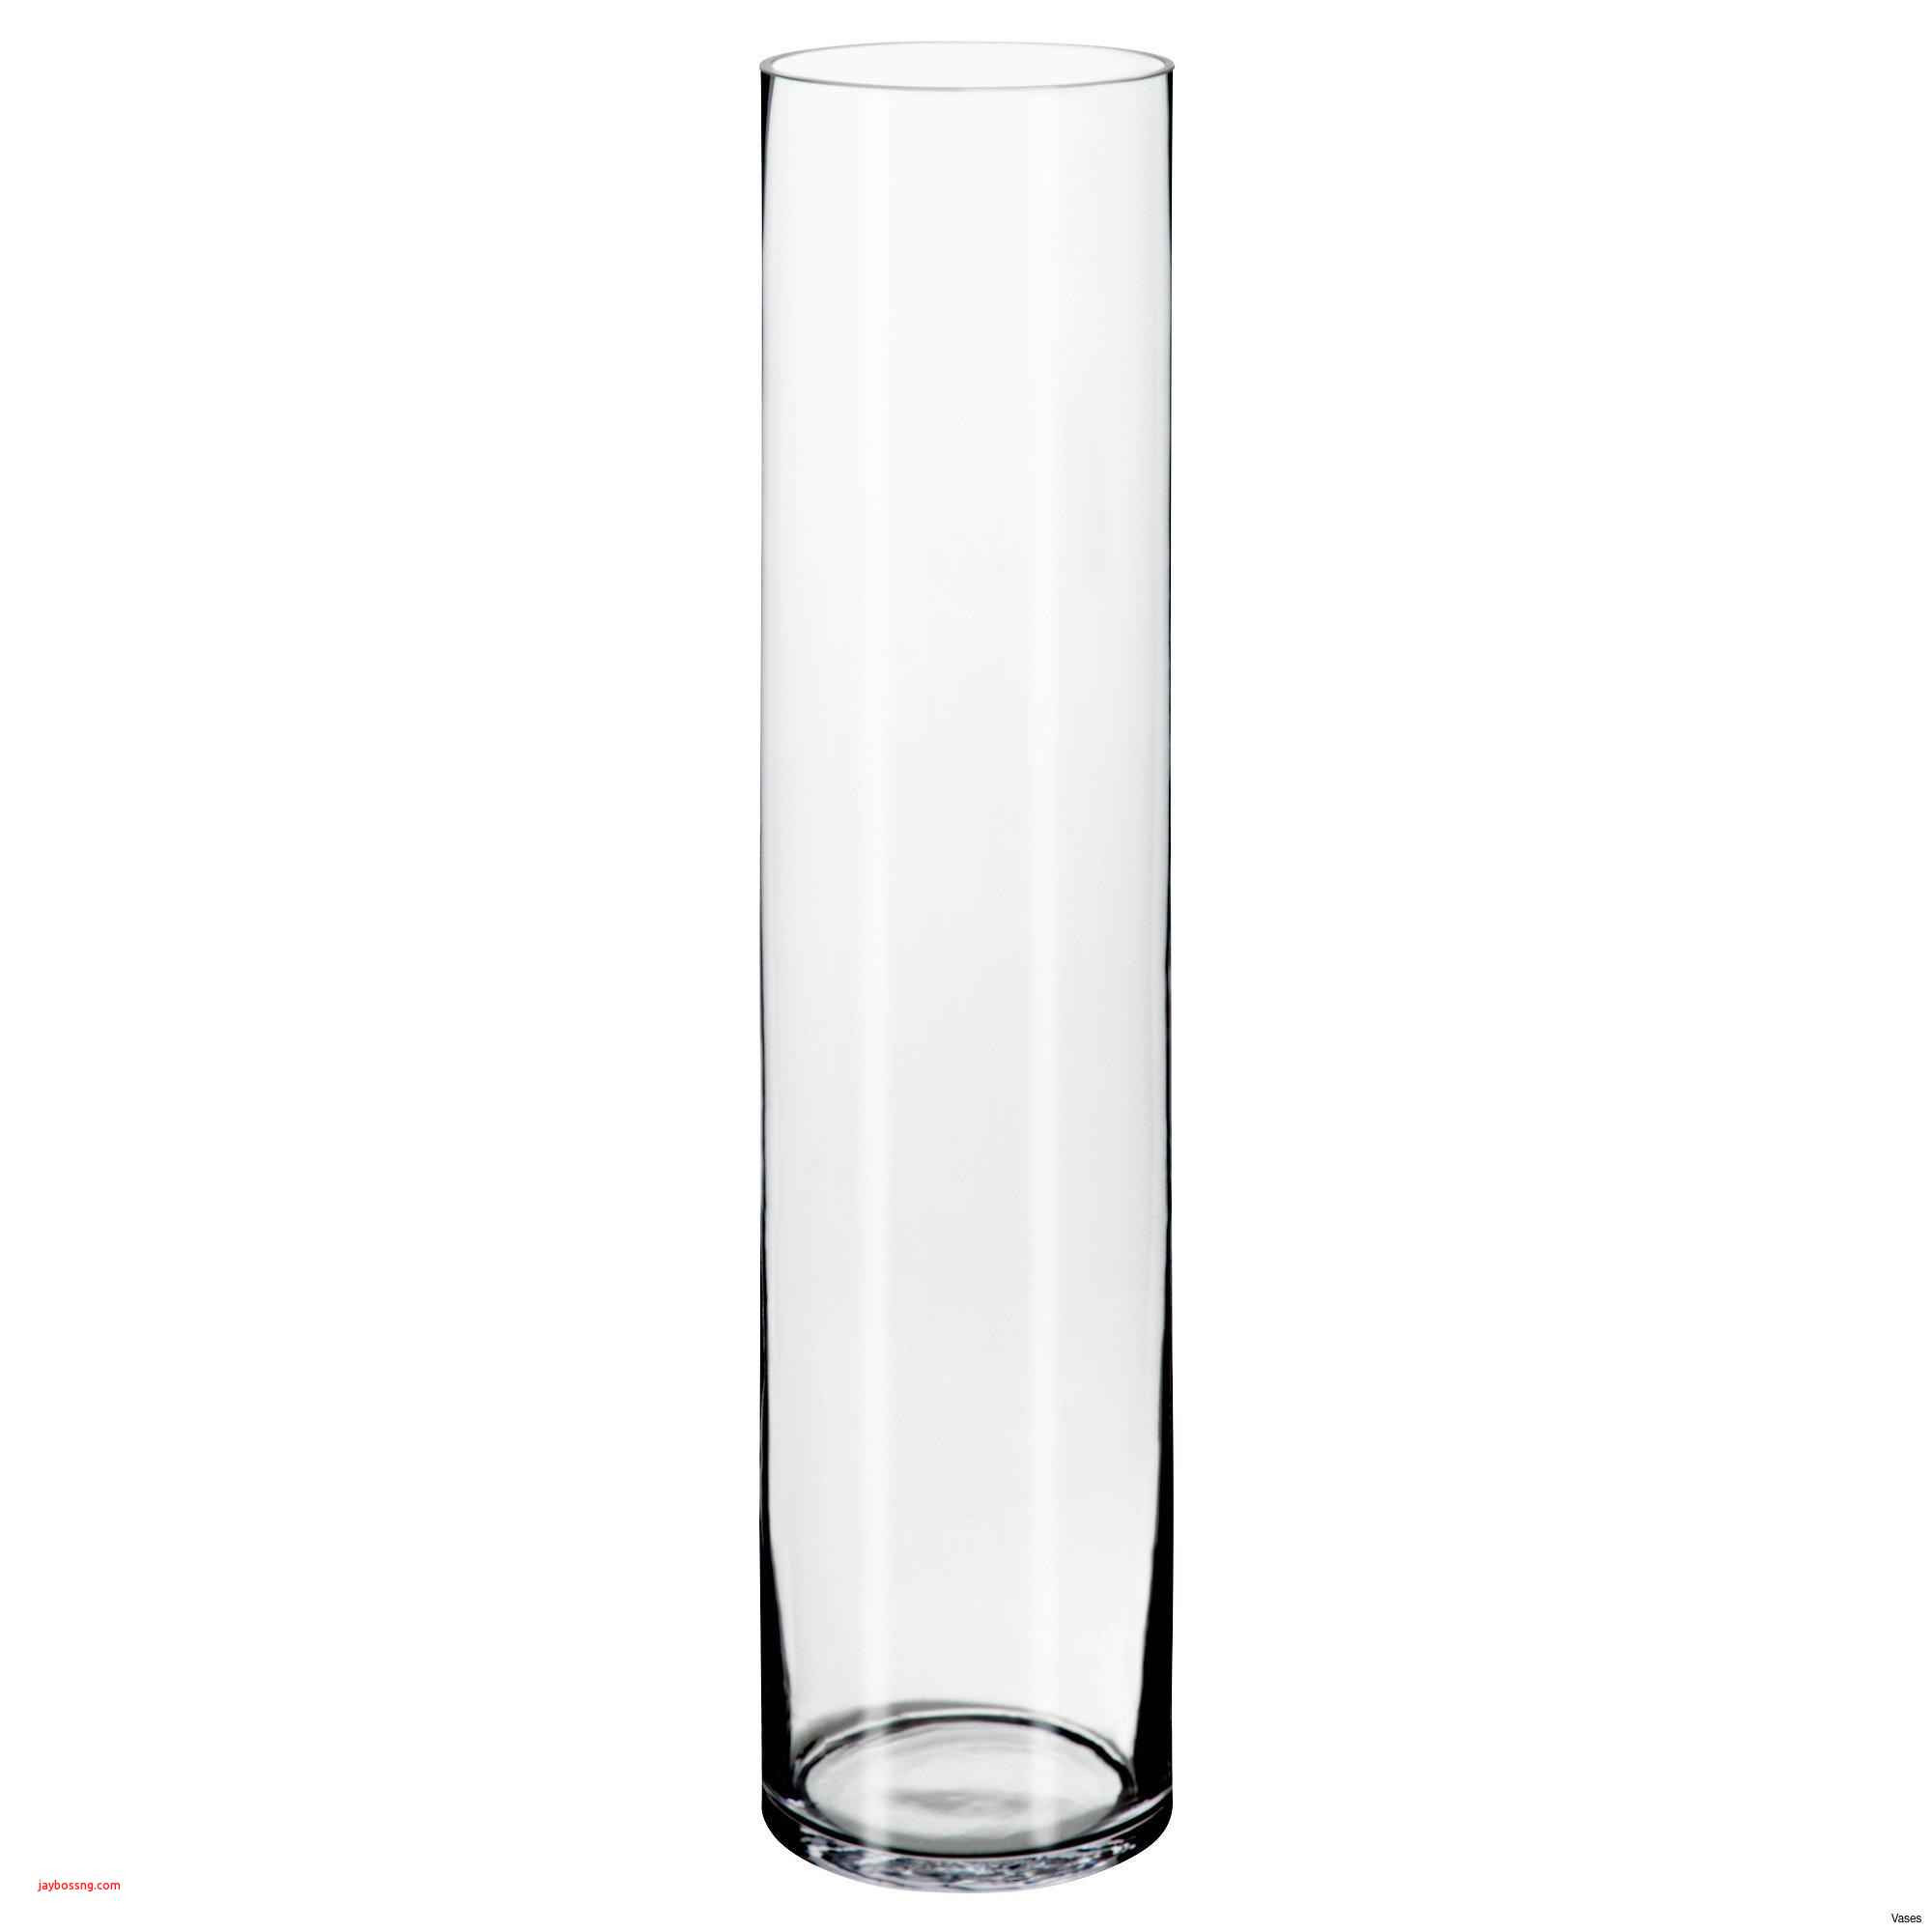 Clear Vases Bulk Of Way Desks for Two In Desk View Regarding Logo Ideas for Bands Inspirational Living Room Tall Vases Bulk Beautiful Ideas Clear Cylinder Vases